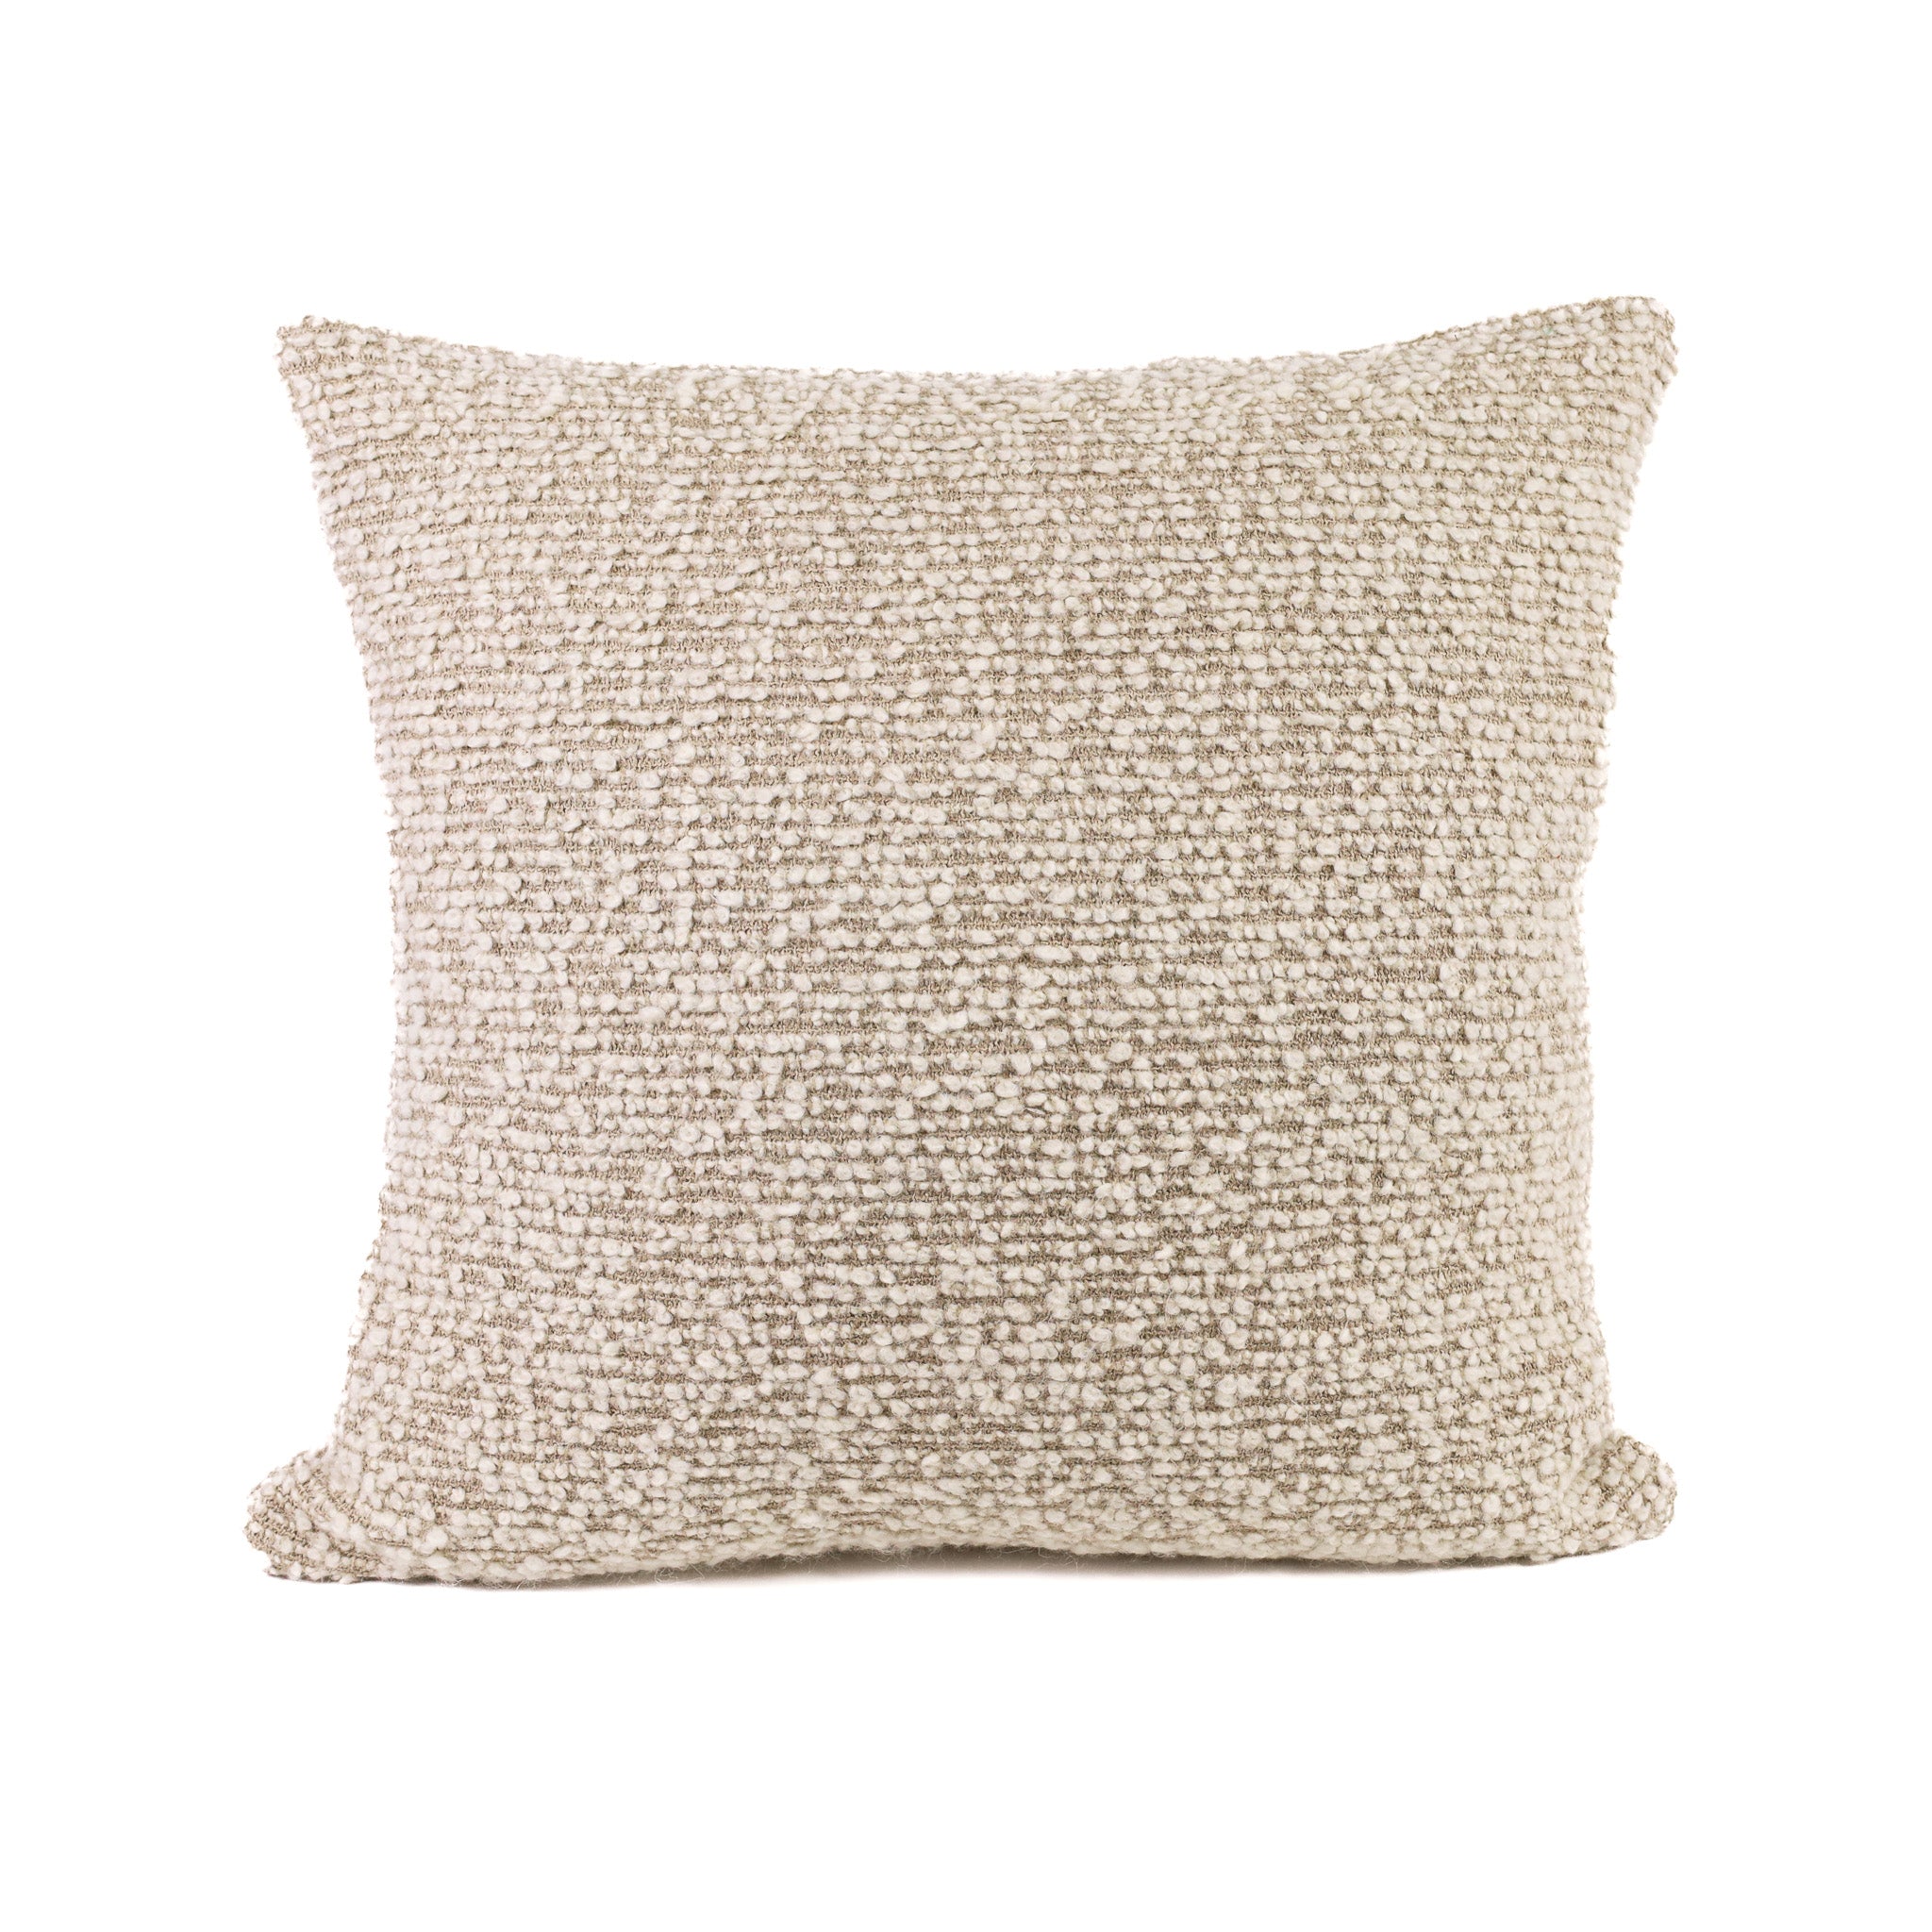 bubley pillow by uniquity at adorn.house